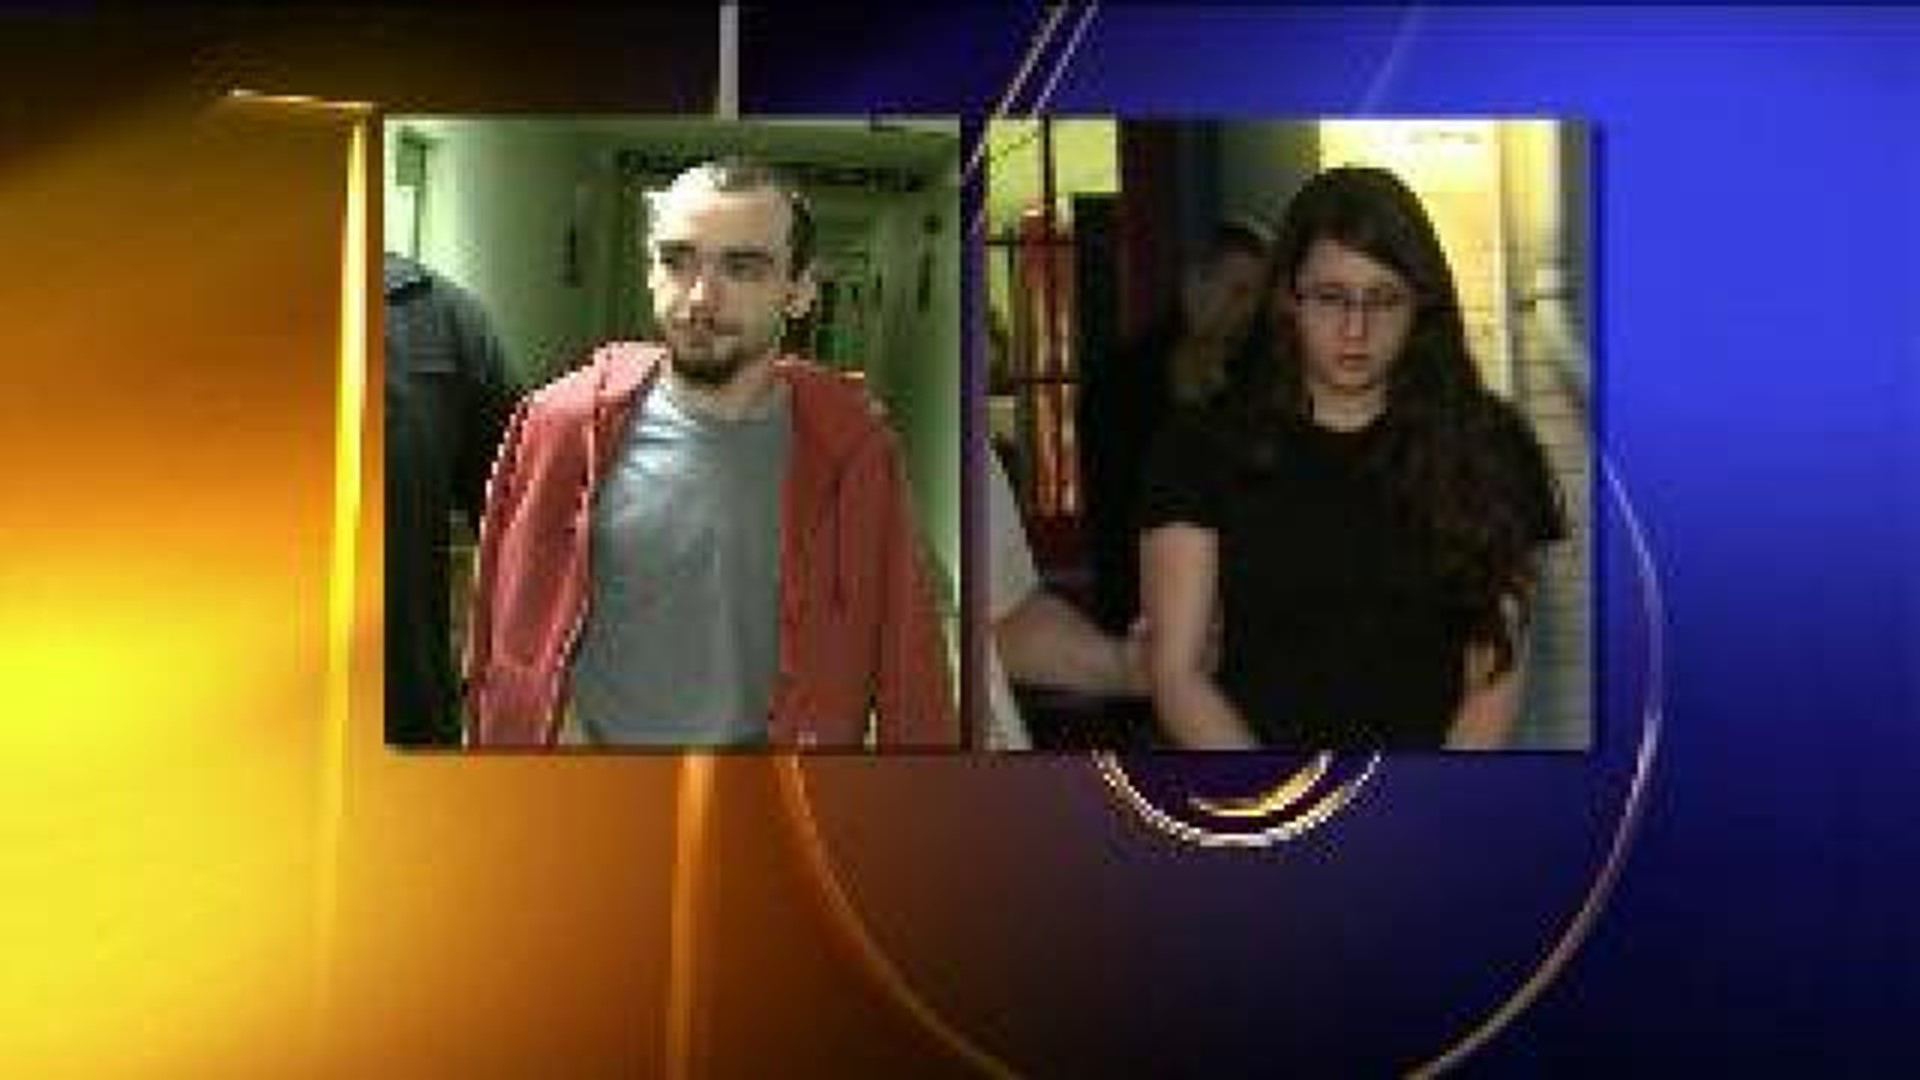 Central PA Reacts to Alleged “Thrill Killers”